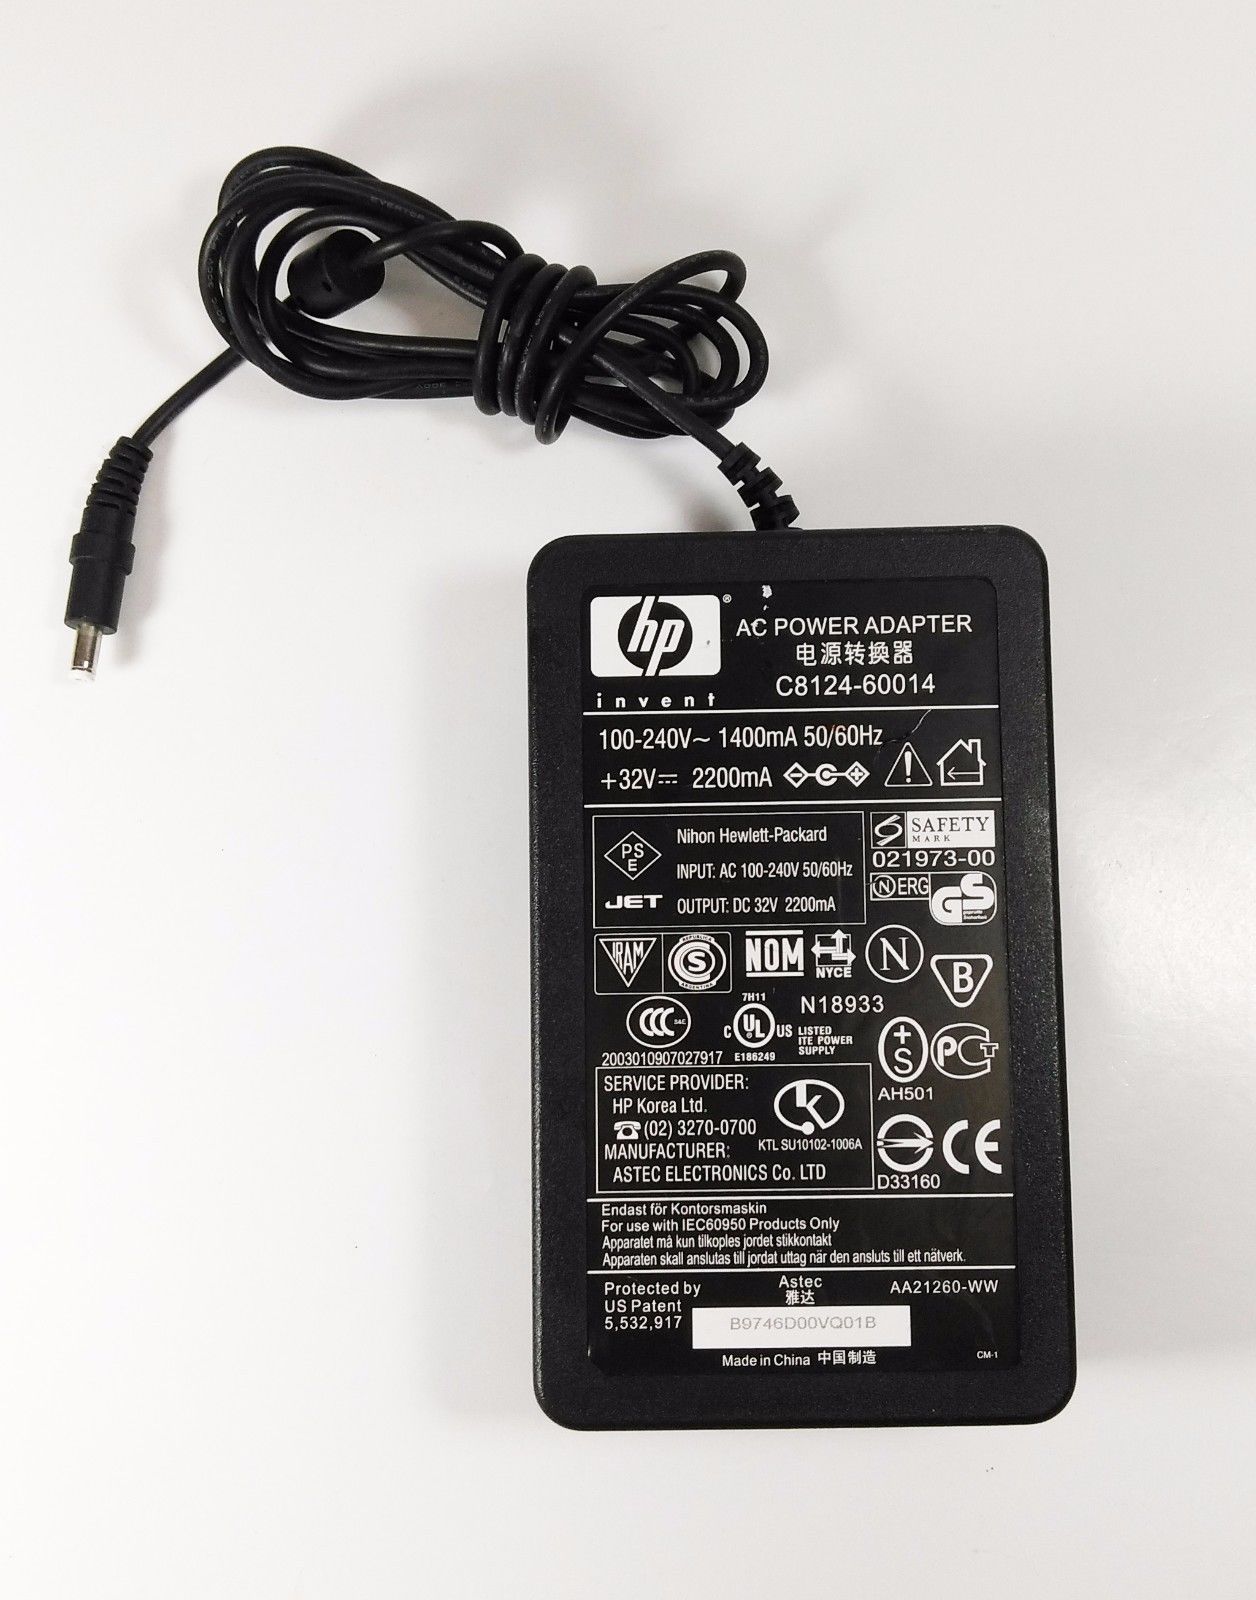 32V 2200mA 70W HP DeskJet C9073A Printer AC Power Adapter Charger